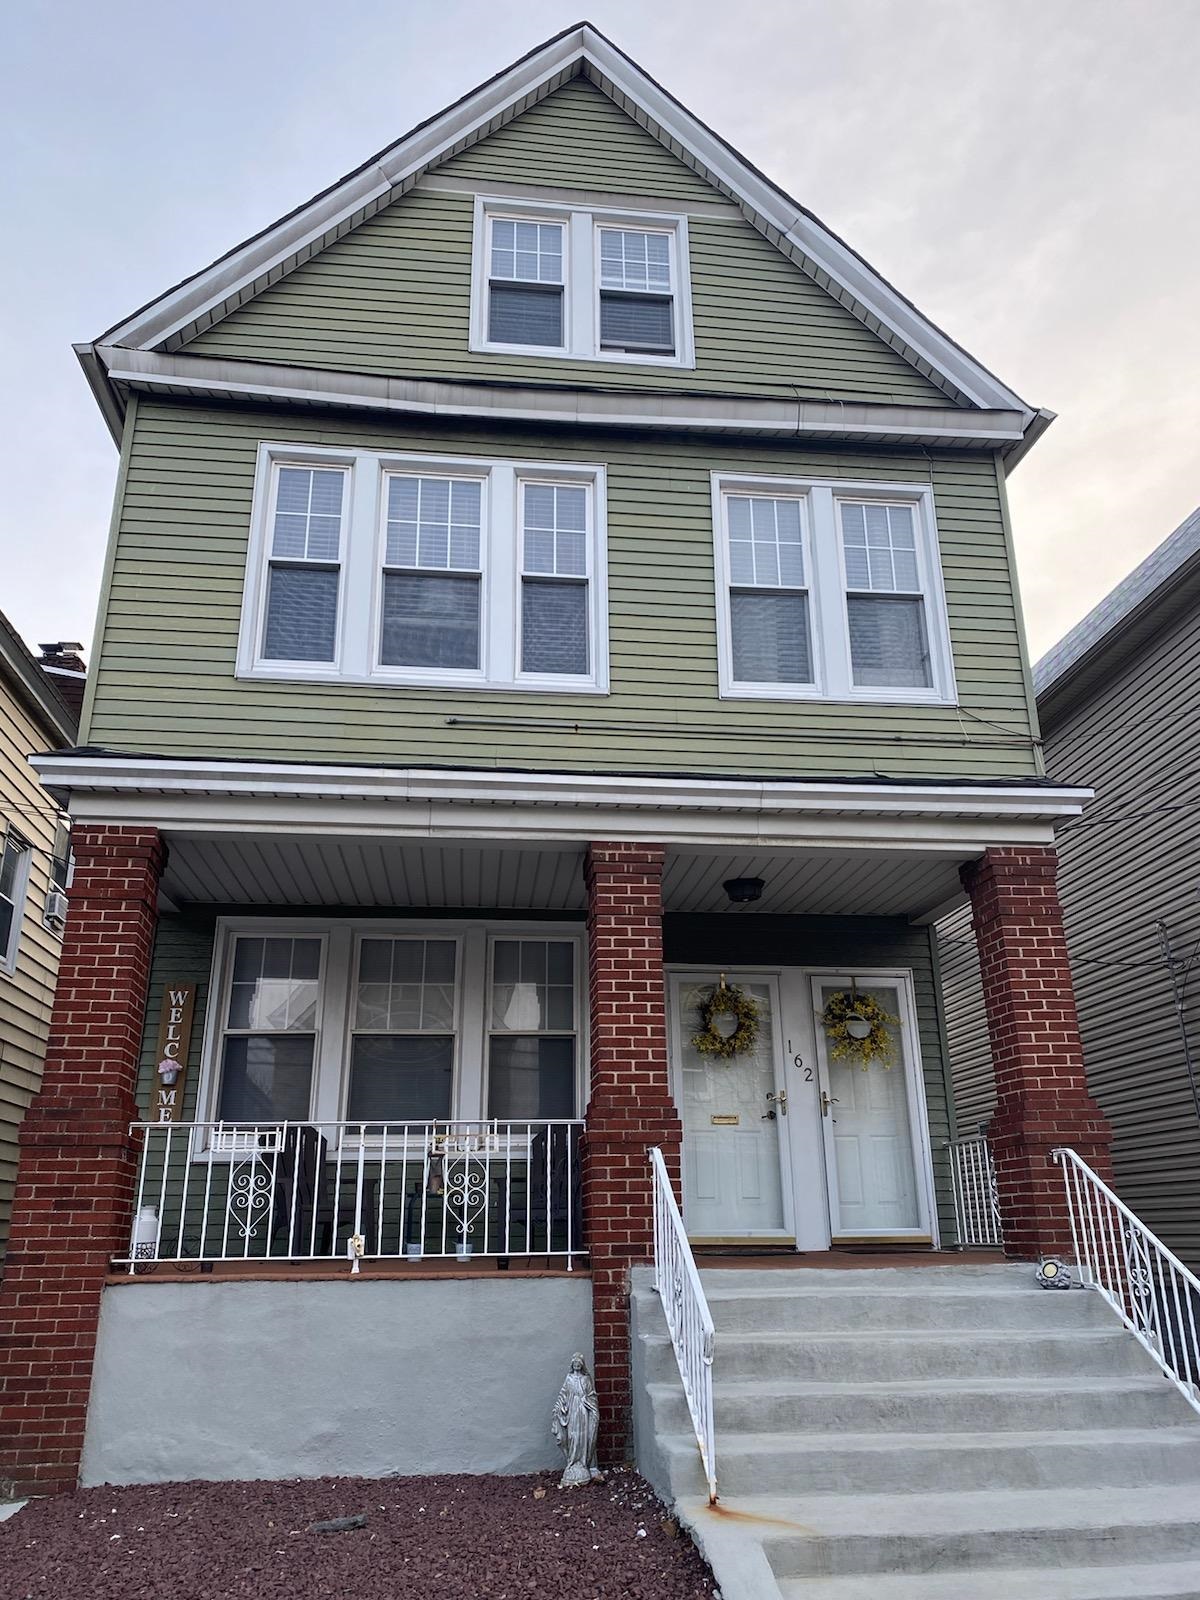 # 240008128 - For Rent in Bayonne NJ